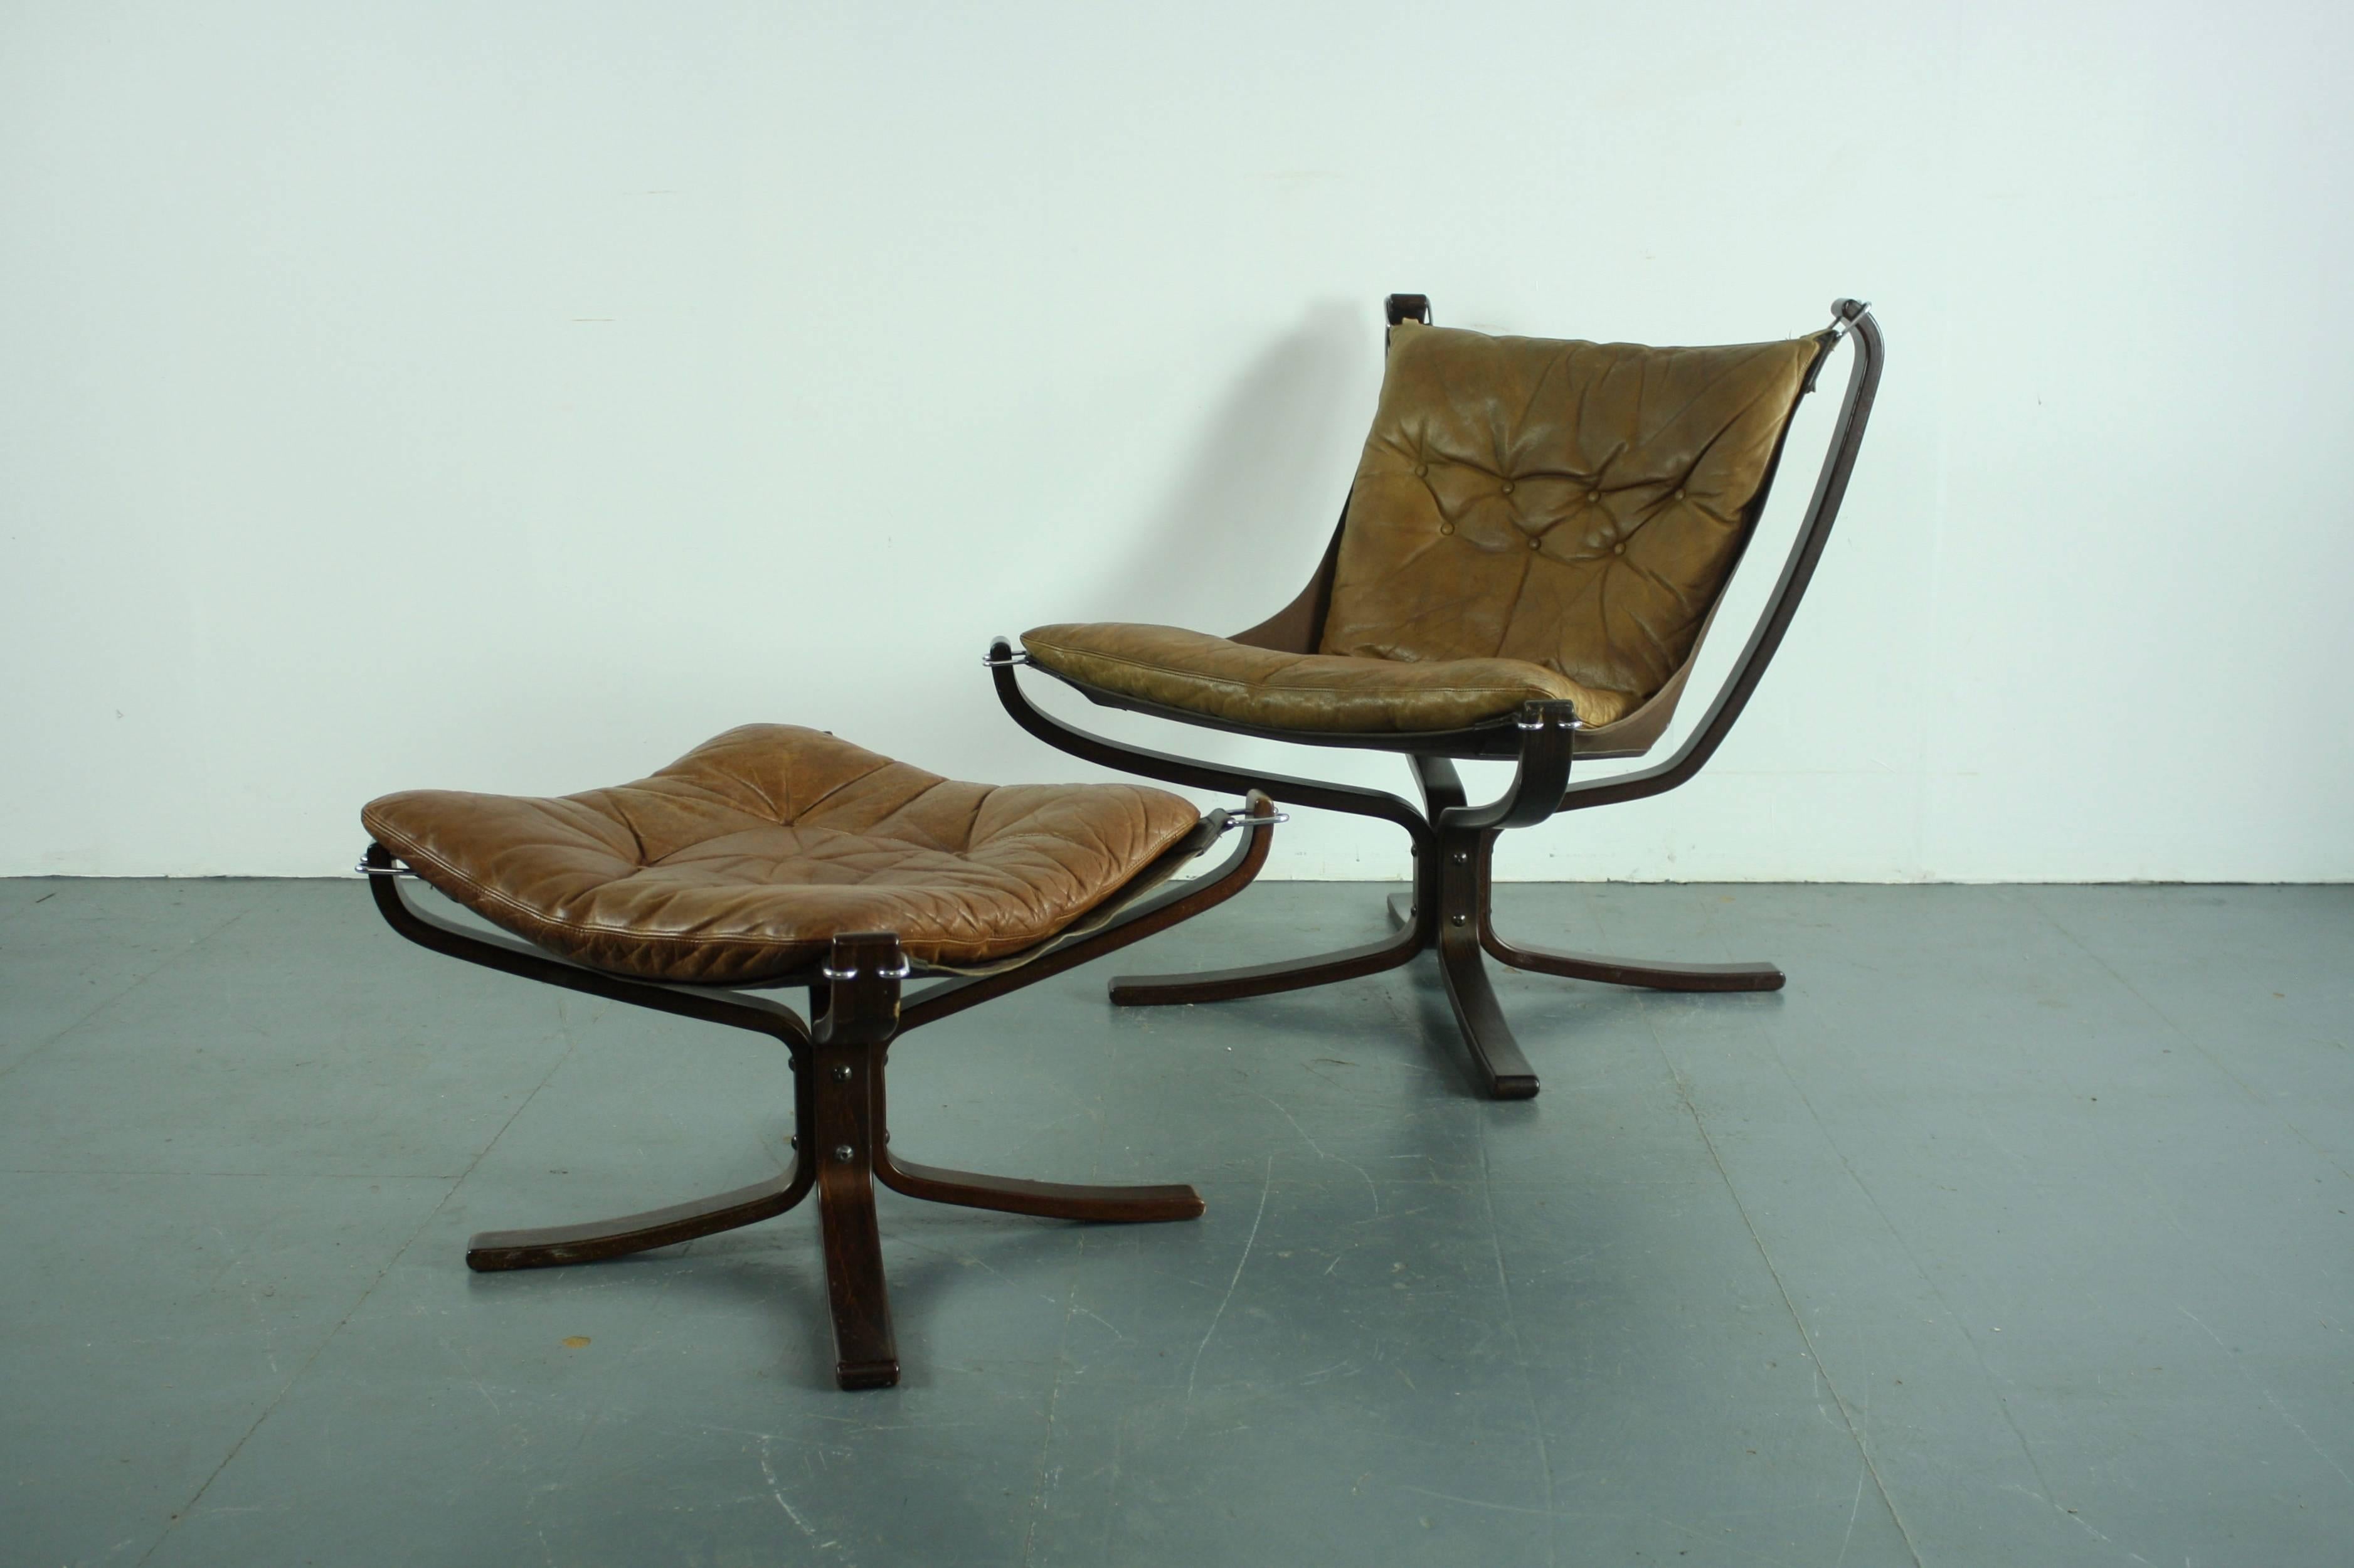 Vintage 1970s Low Back Camel Leather Falcon Chair and Ottoman by Sigurd Resell In Good Condition For Sale In Lewes, East Sussex